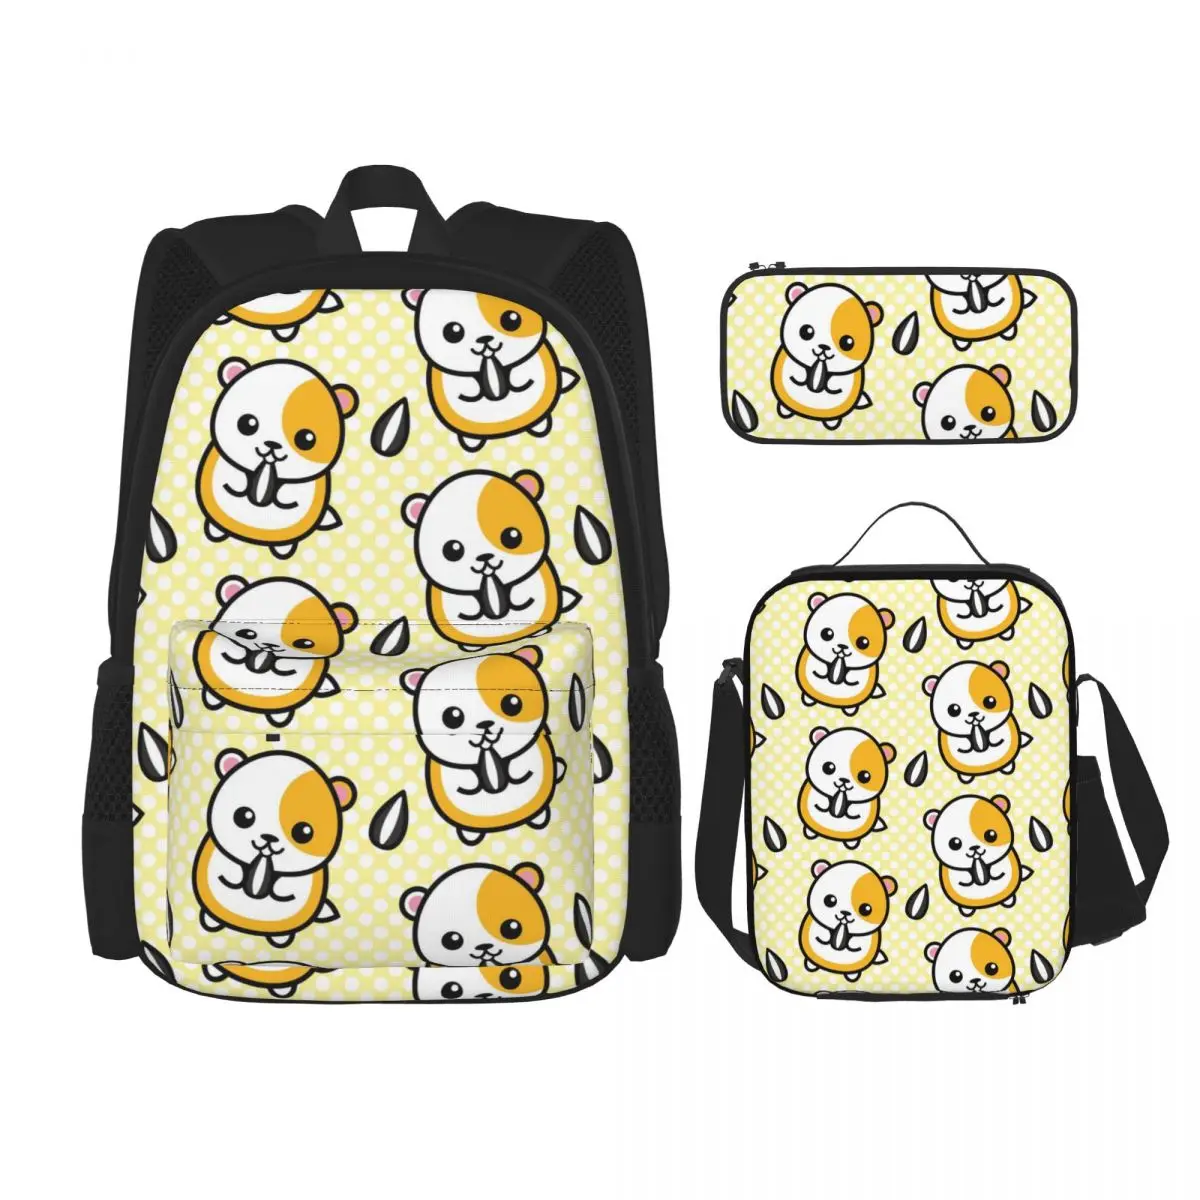 

3PCS School Backpack Set Hamsters Seeds And Yellow Polka Dots Bag Casual Student Backpacks School Bags for Teenagers Boys Girls